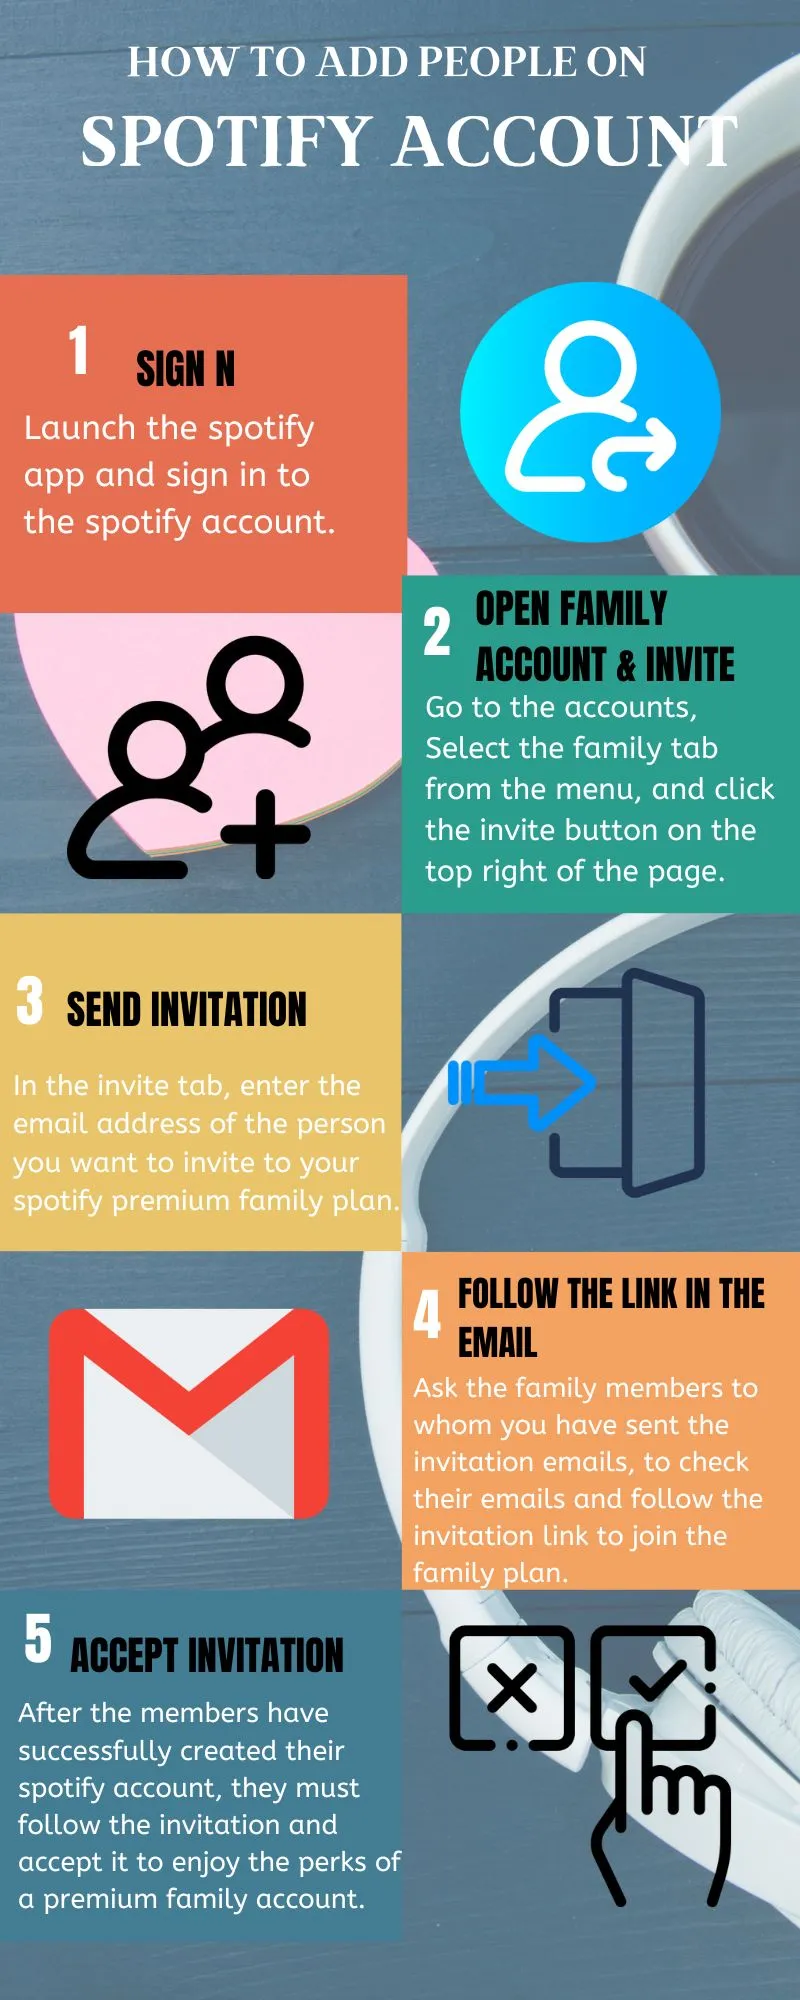 How to add people on Spotify family plan-infographic